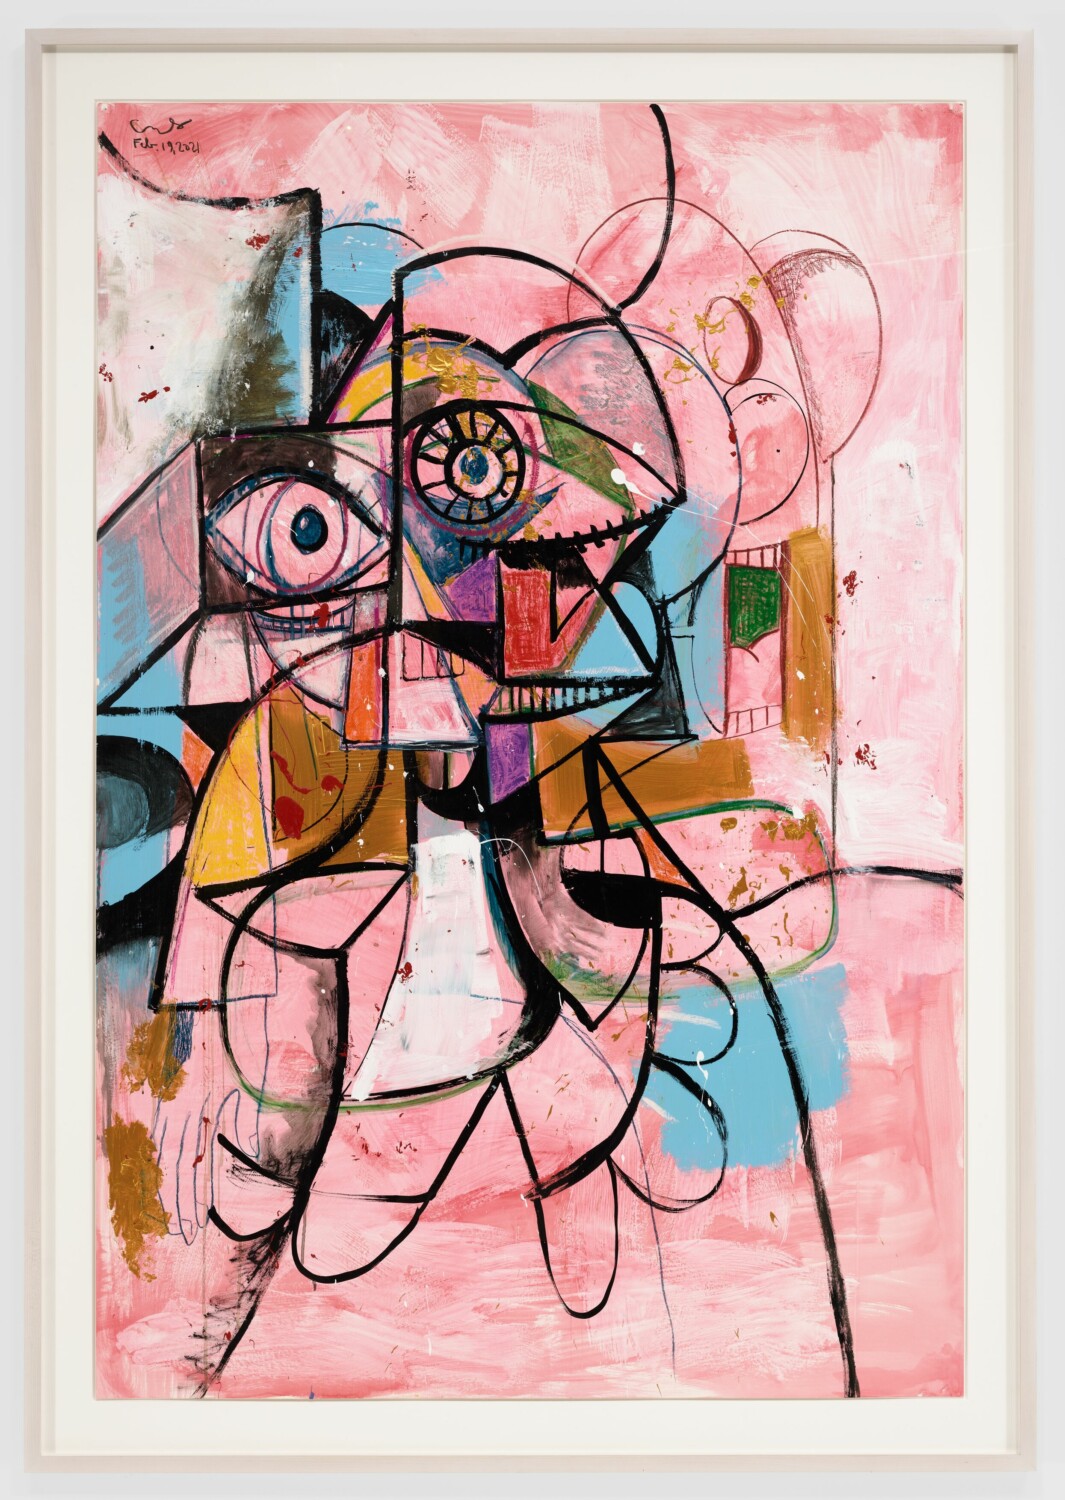 CONDO108882 George Condo  The Drifter  2021 Acrylic, gesso, gold paint, ink, wax crayon & pastel on paper 182.9 x 121.9 cm / 72 x 48 in © George Condo Courtesy the artist and Hauser & Wirth Photo: Thomas Barratt